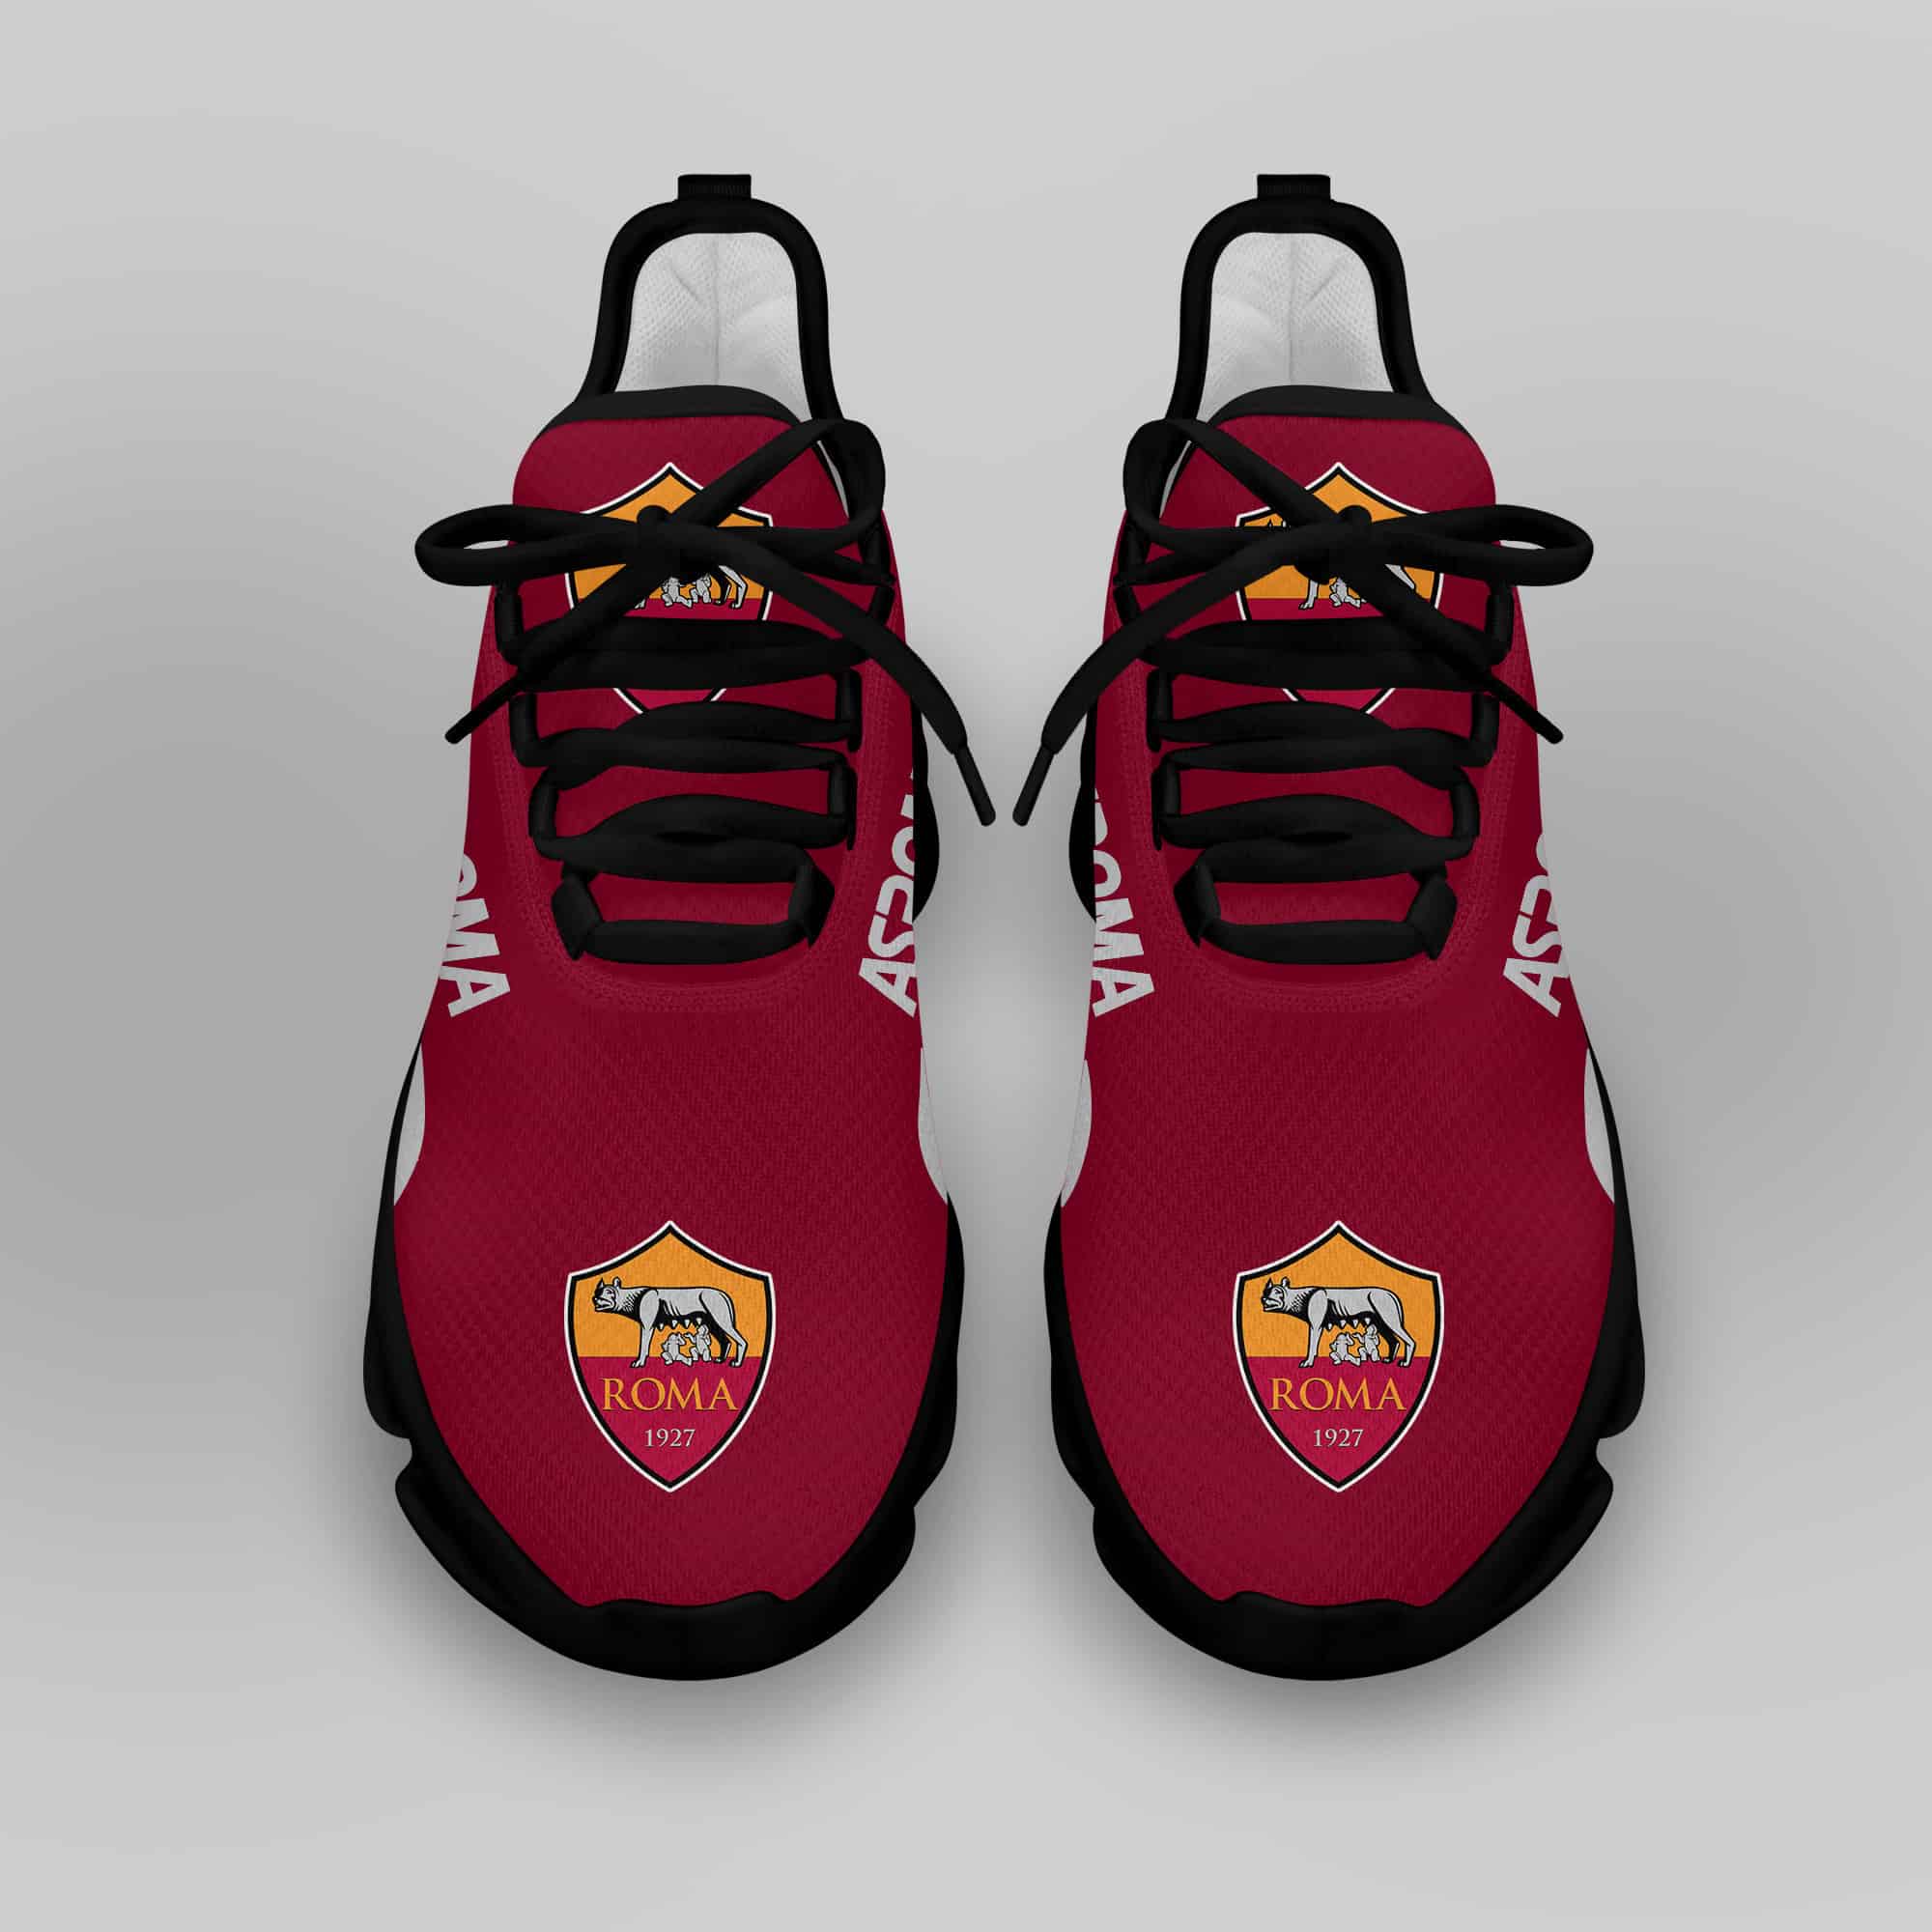 As Roma Running Shoes Max Soul Shoes Sneakers Ver 5 4